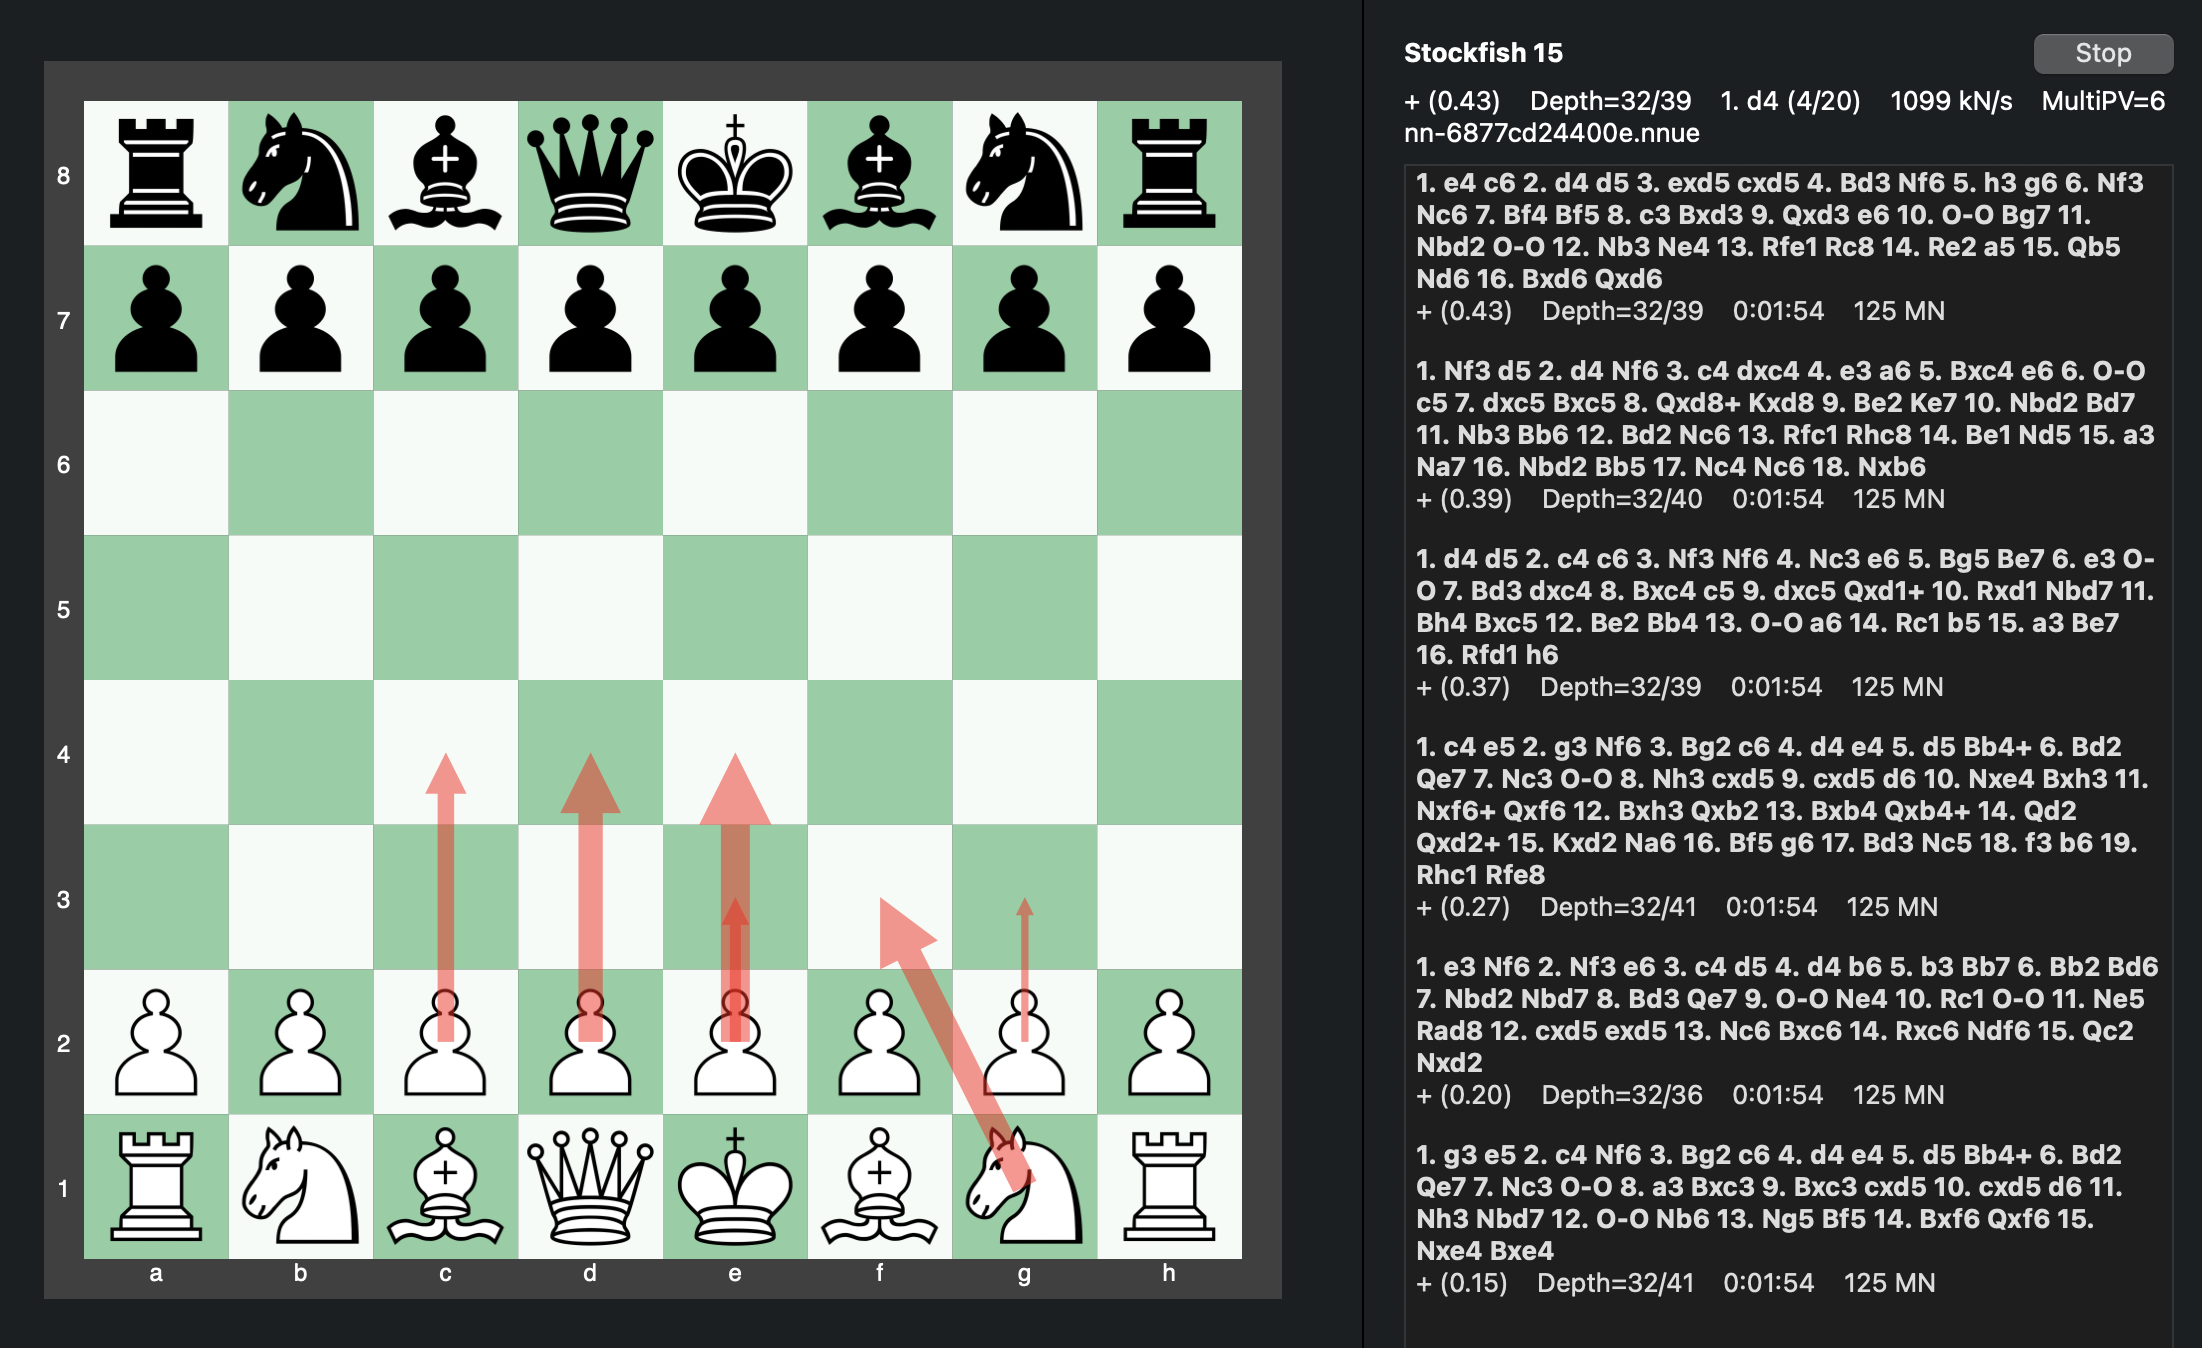 How to set up the Stockfish chess engine to improve your skills - Neowin